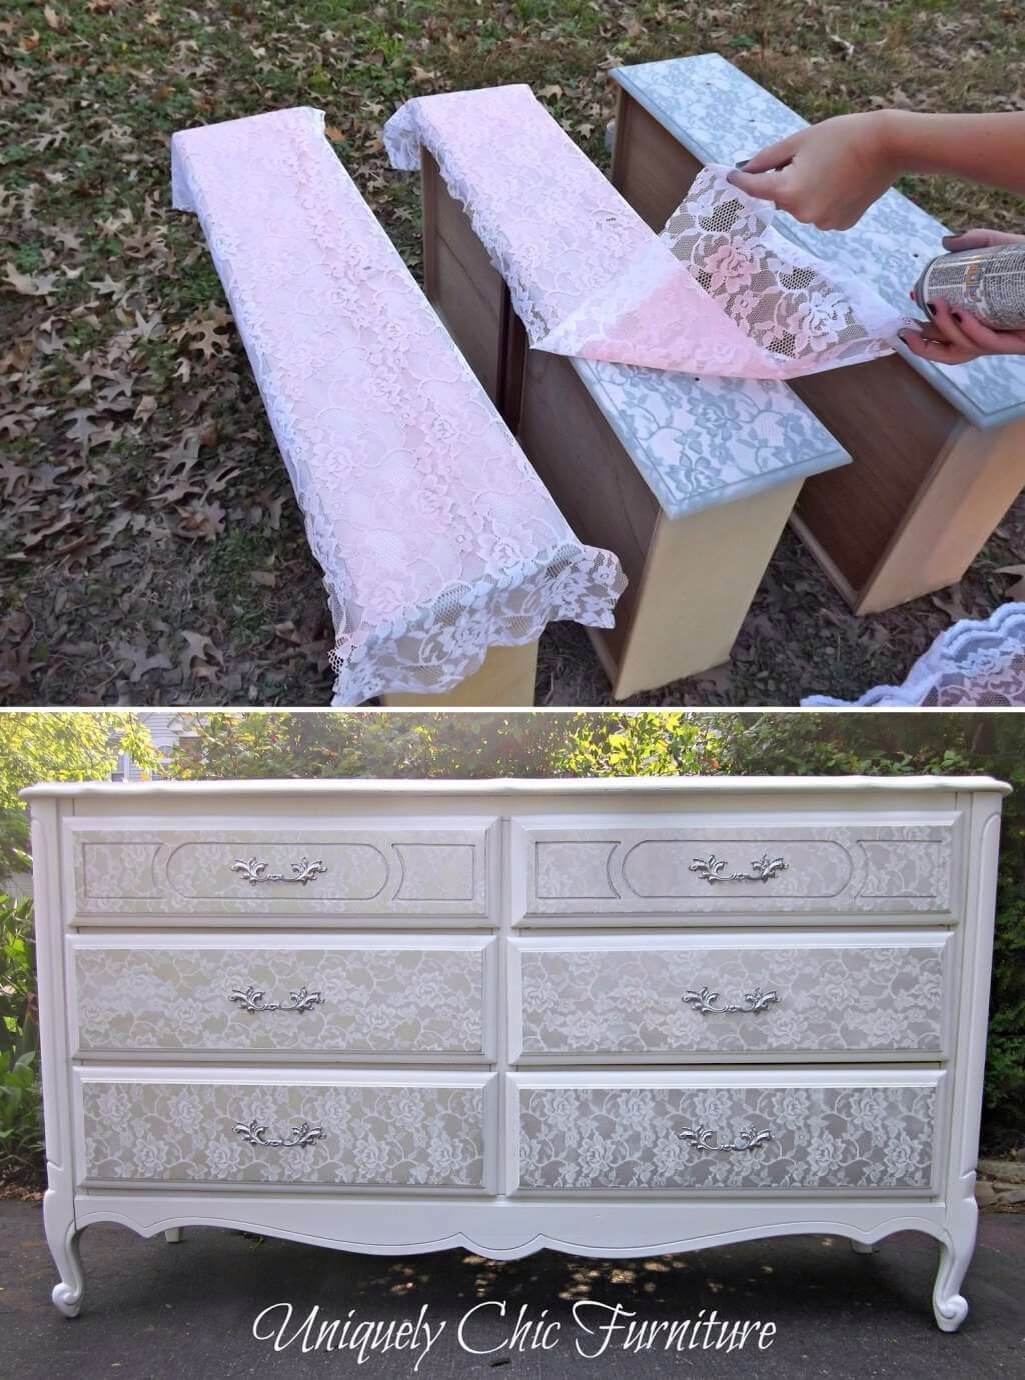 Use Old Lace to Stencil Wood